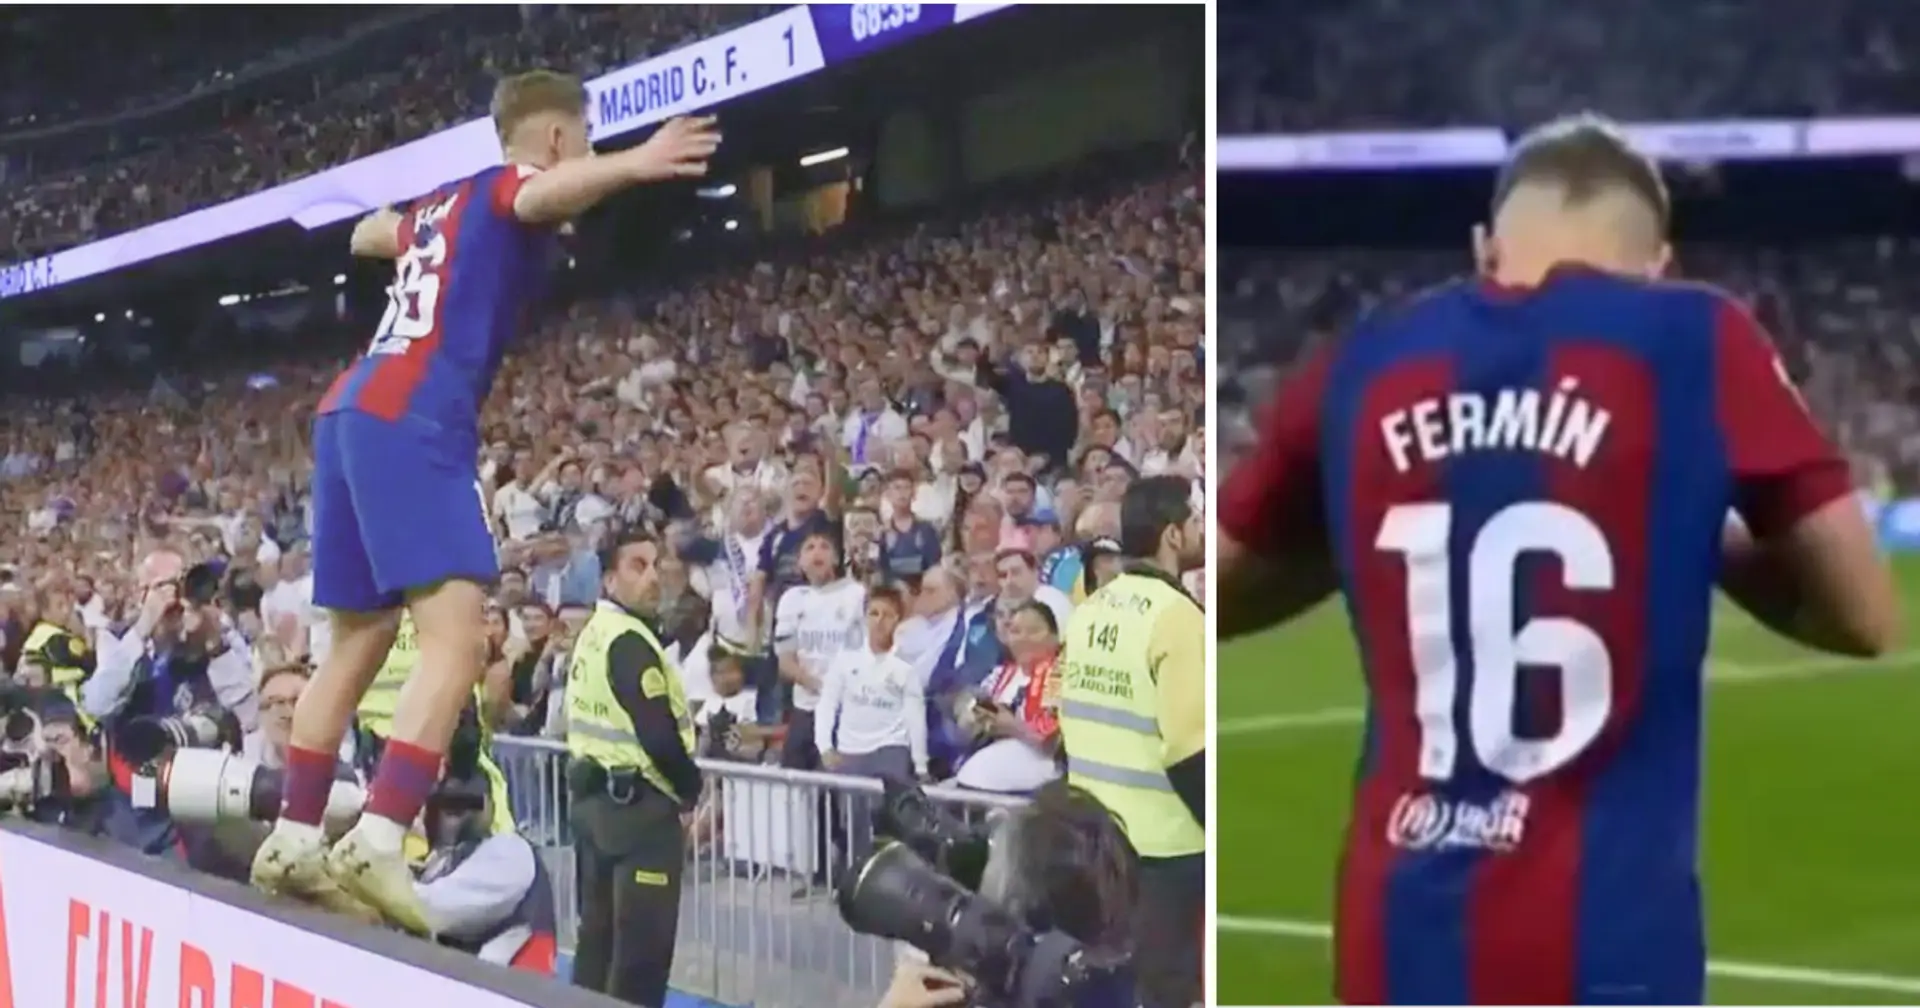 Fermin Lopez celebrates in front of Madrid fans after giving Barca lead in El Clasico